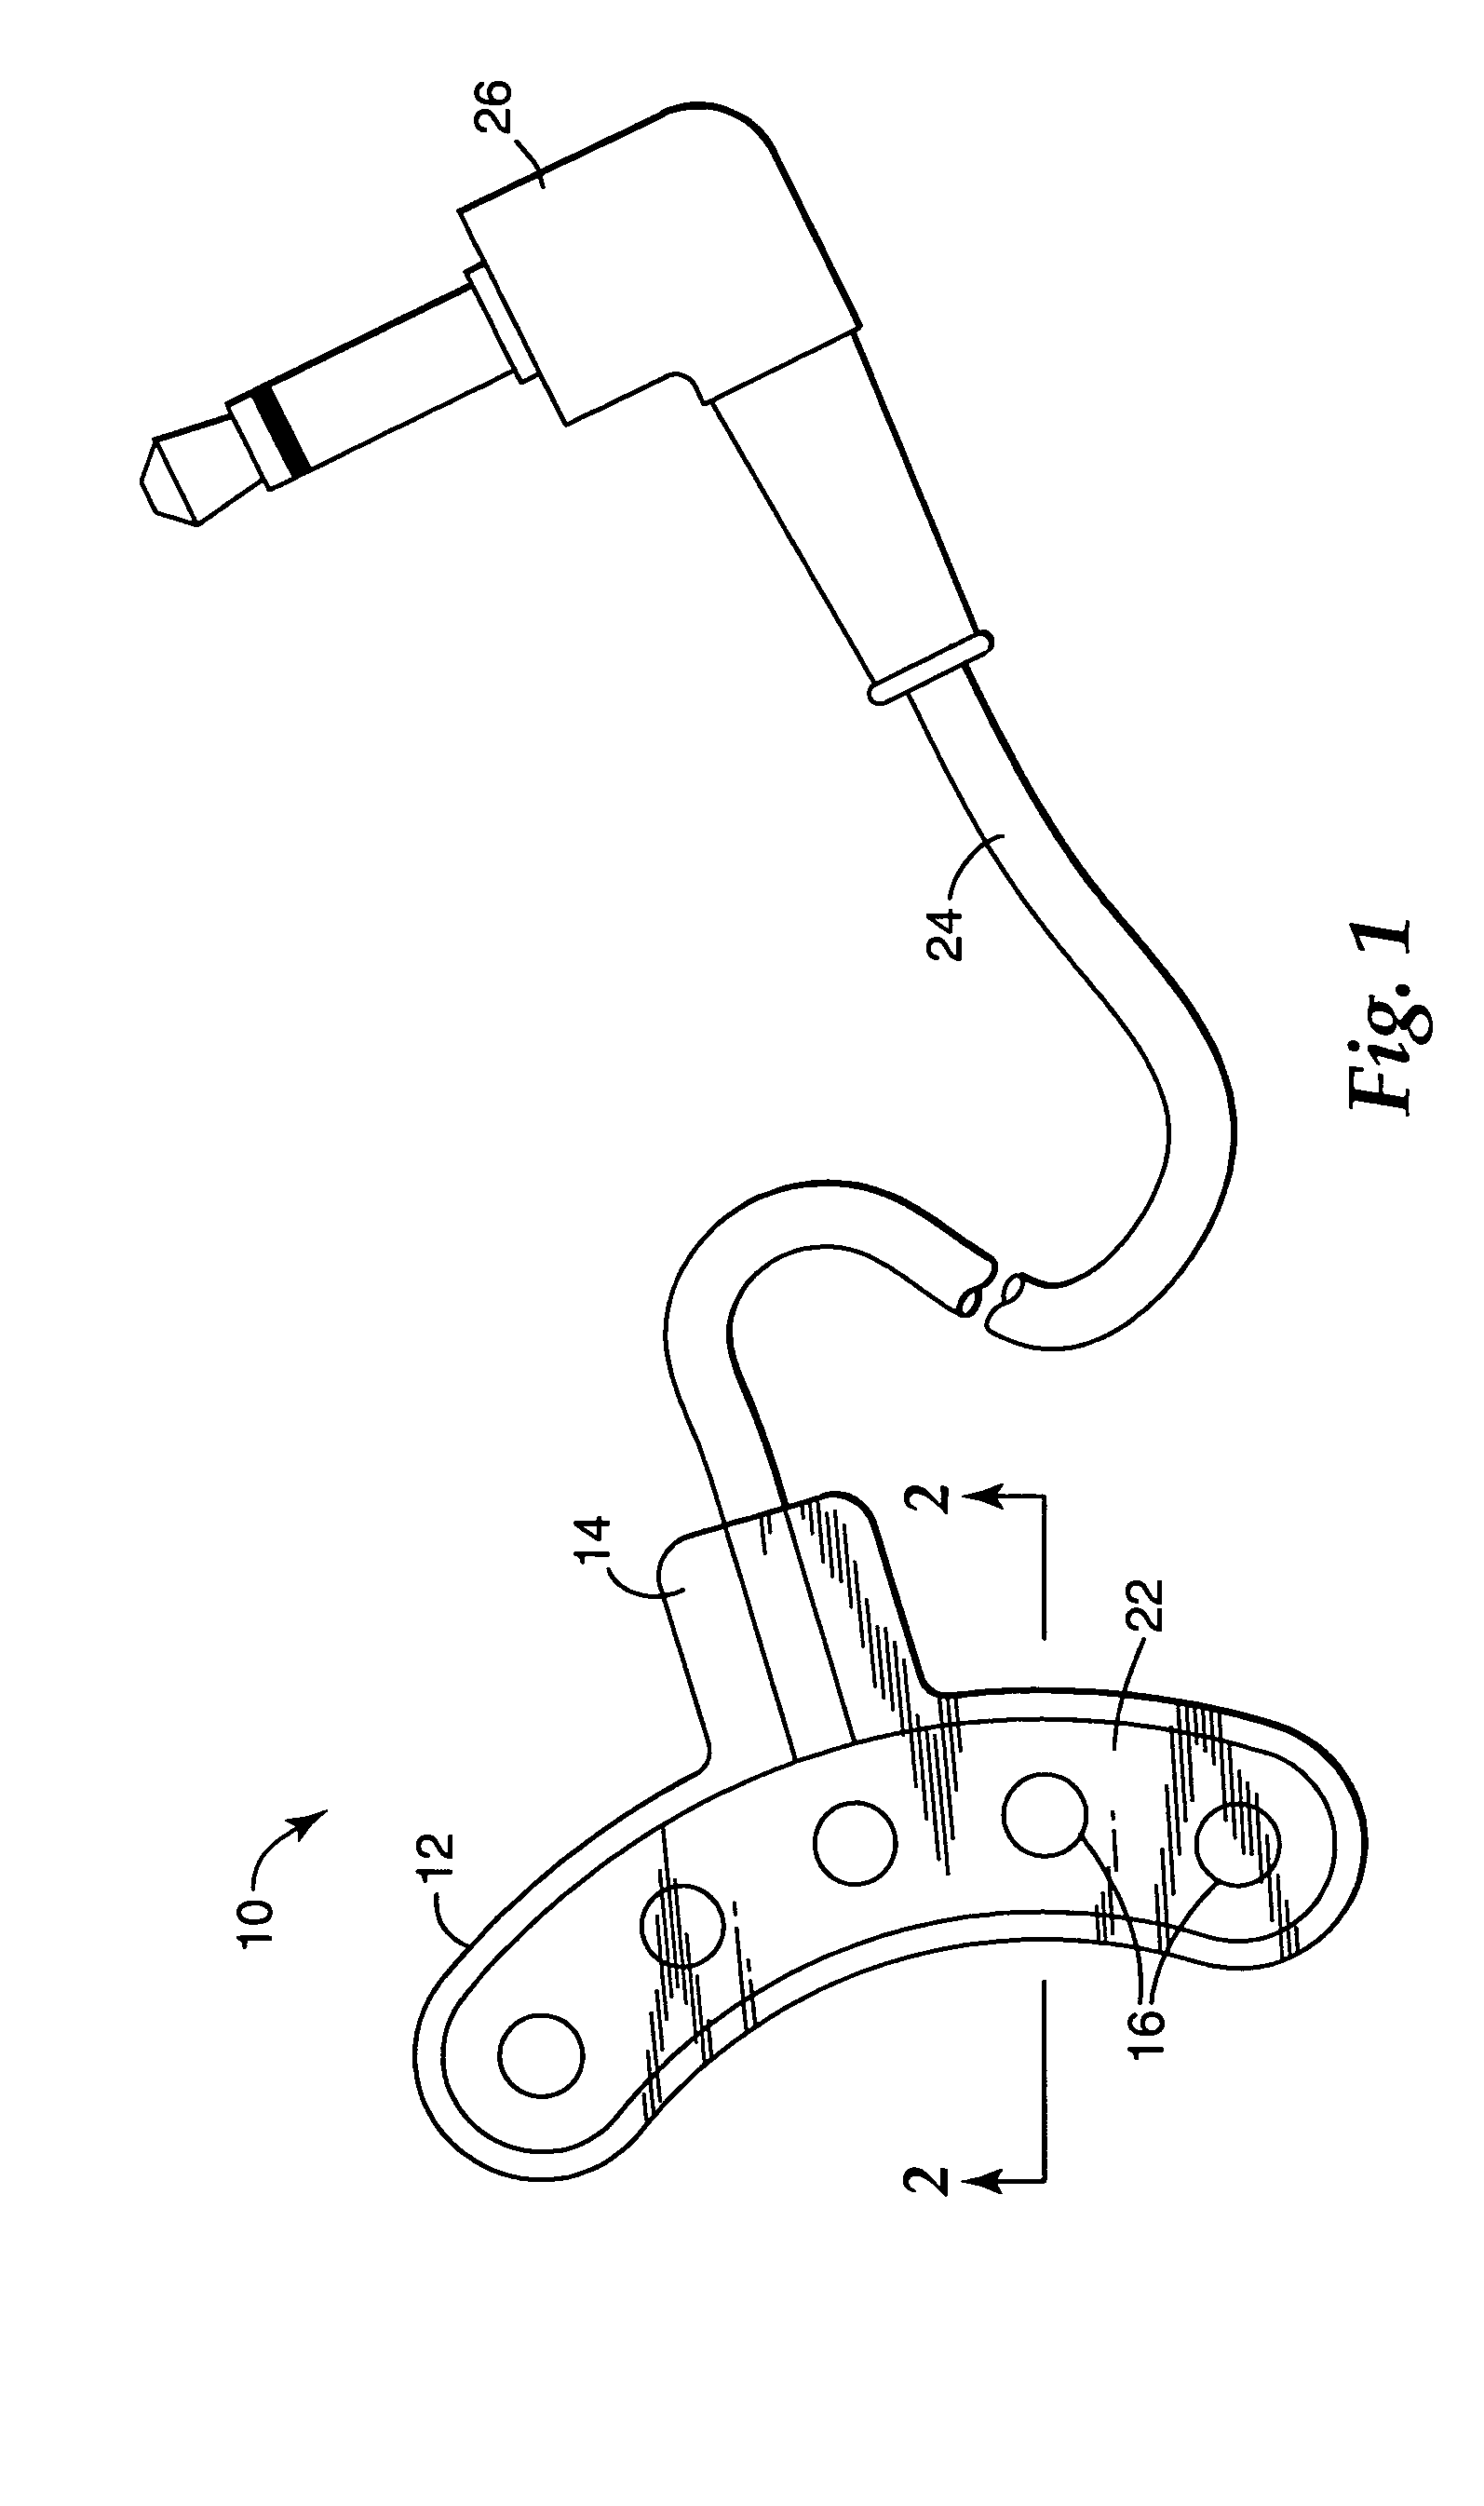 Method and apparatus for bonding orthodontic appliances to teeth